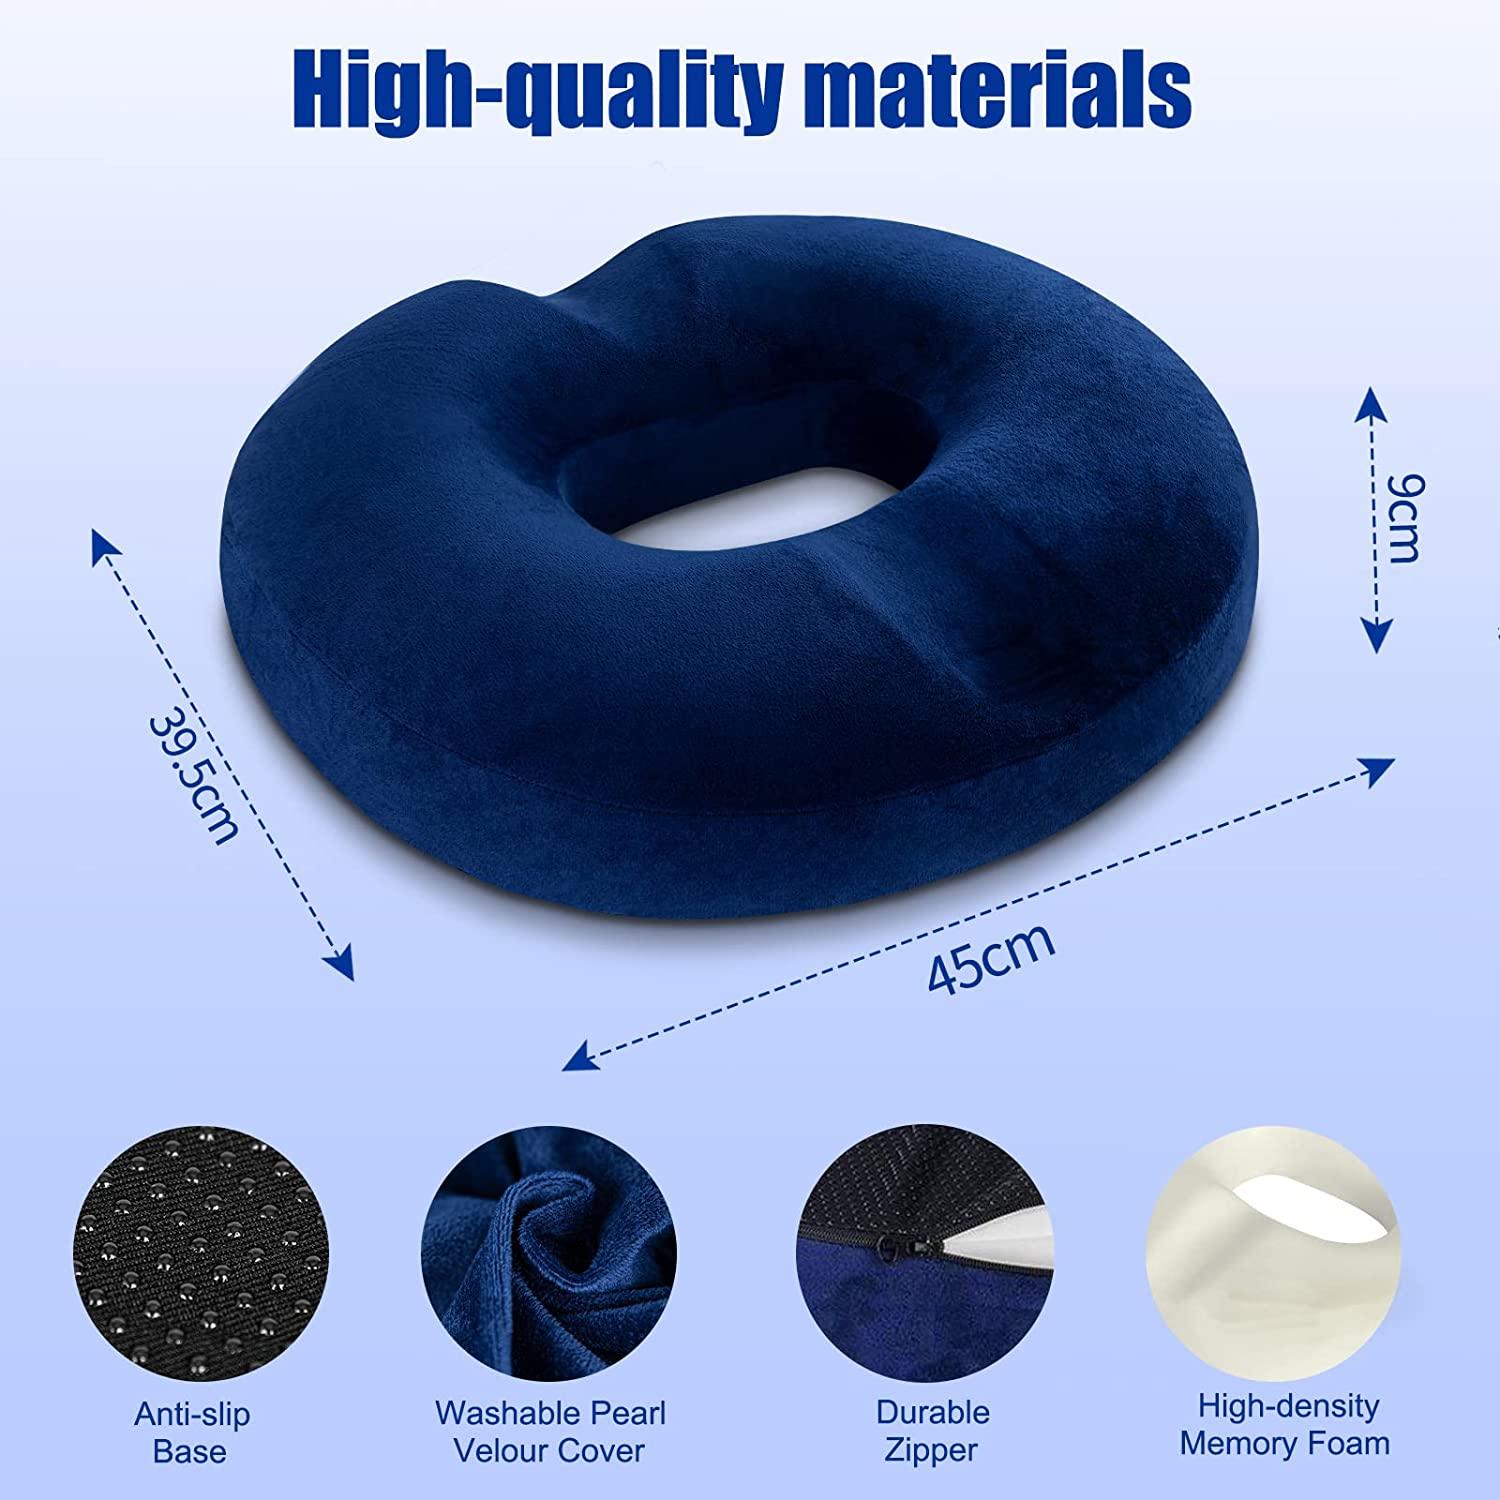 Visible Hole Donut Orthopedic Seat Cushion Relieves Piles, Lower